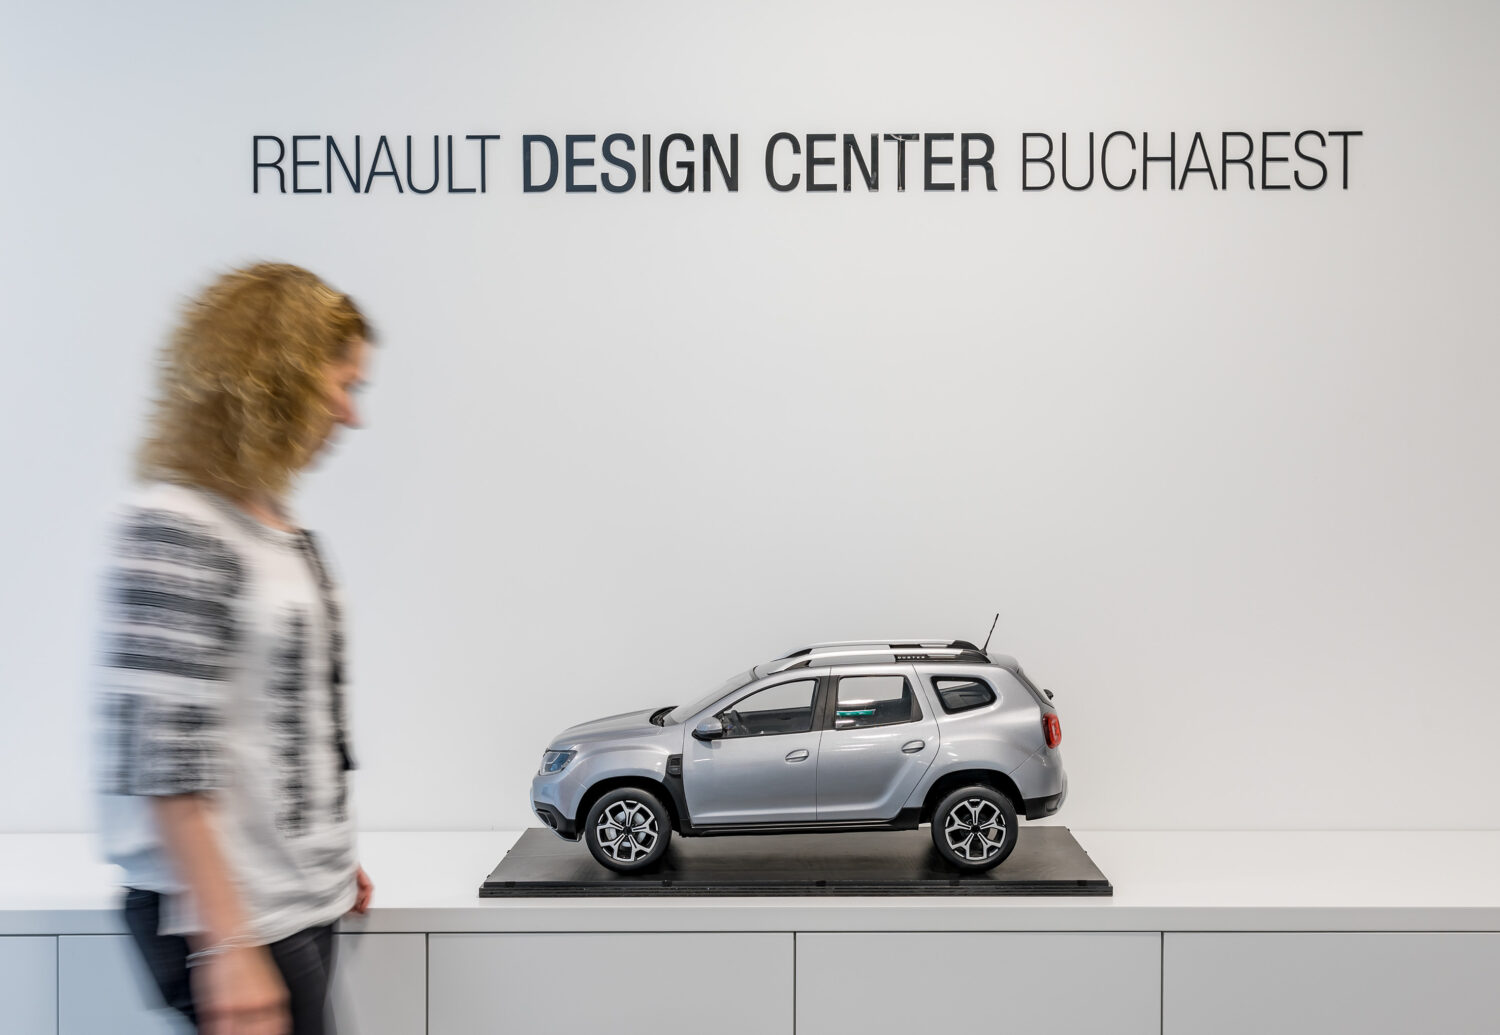 2019 - The new Renault Bucharest Connected centre